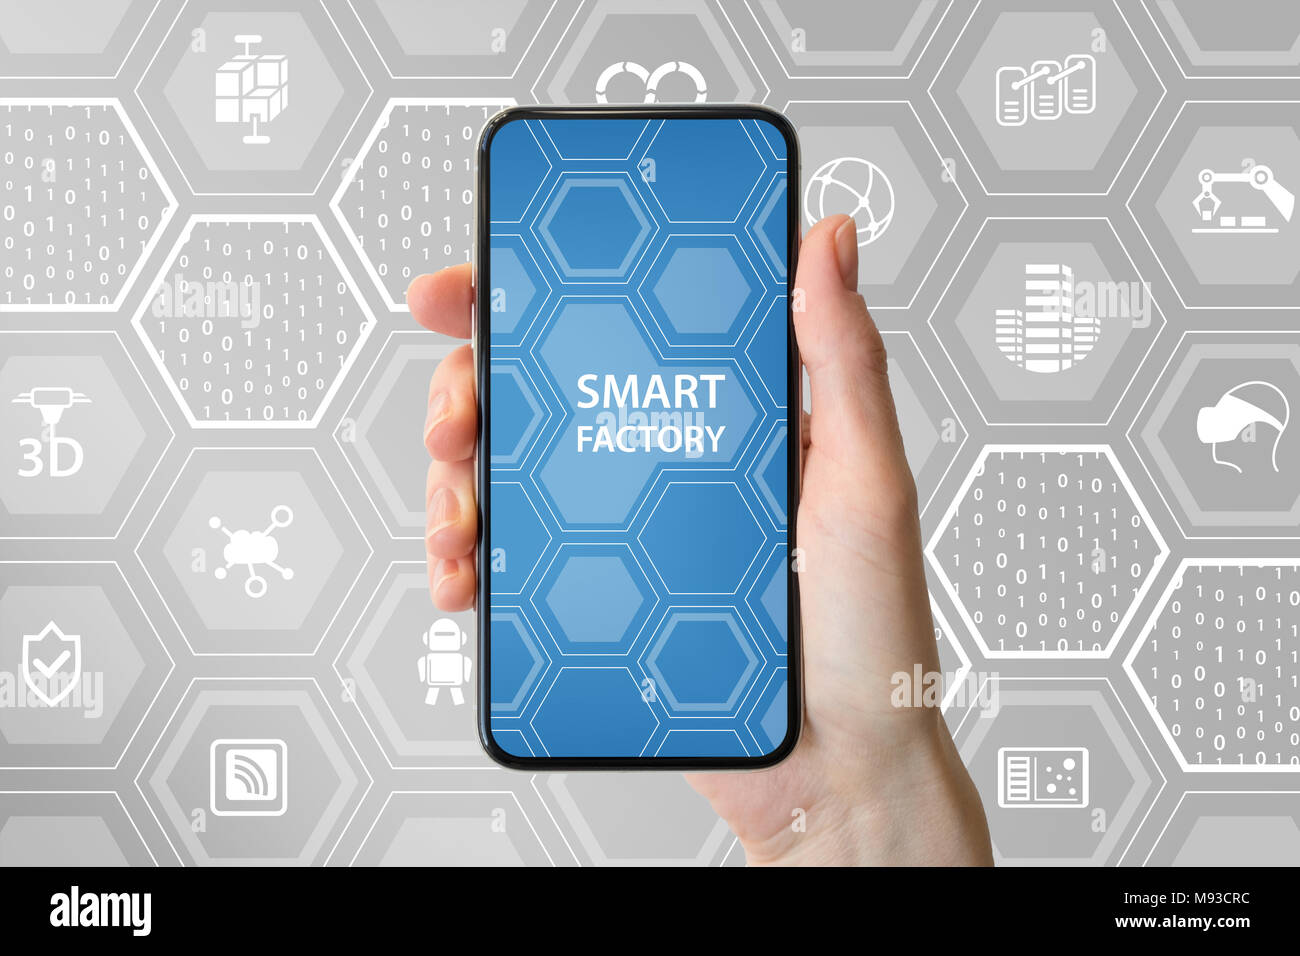 Smart factory concept with symbols. Hand holding bezel free smart phone. Stock Photo